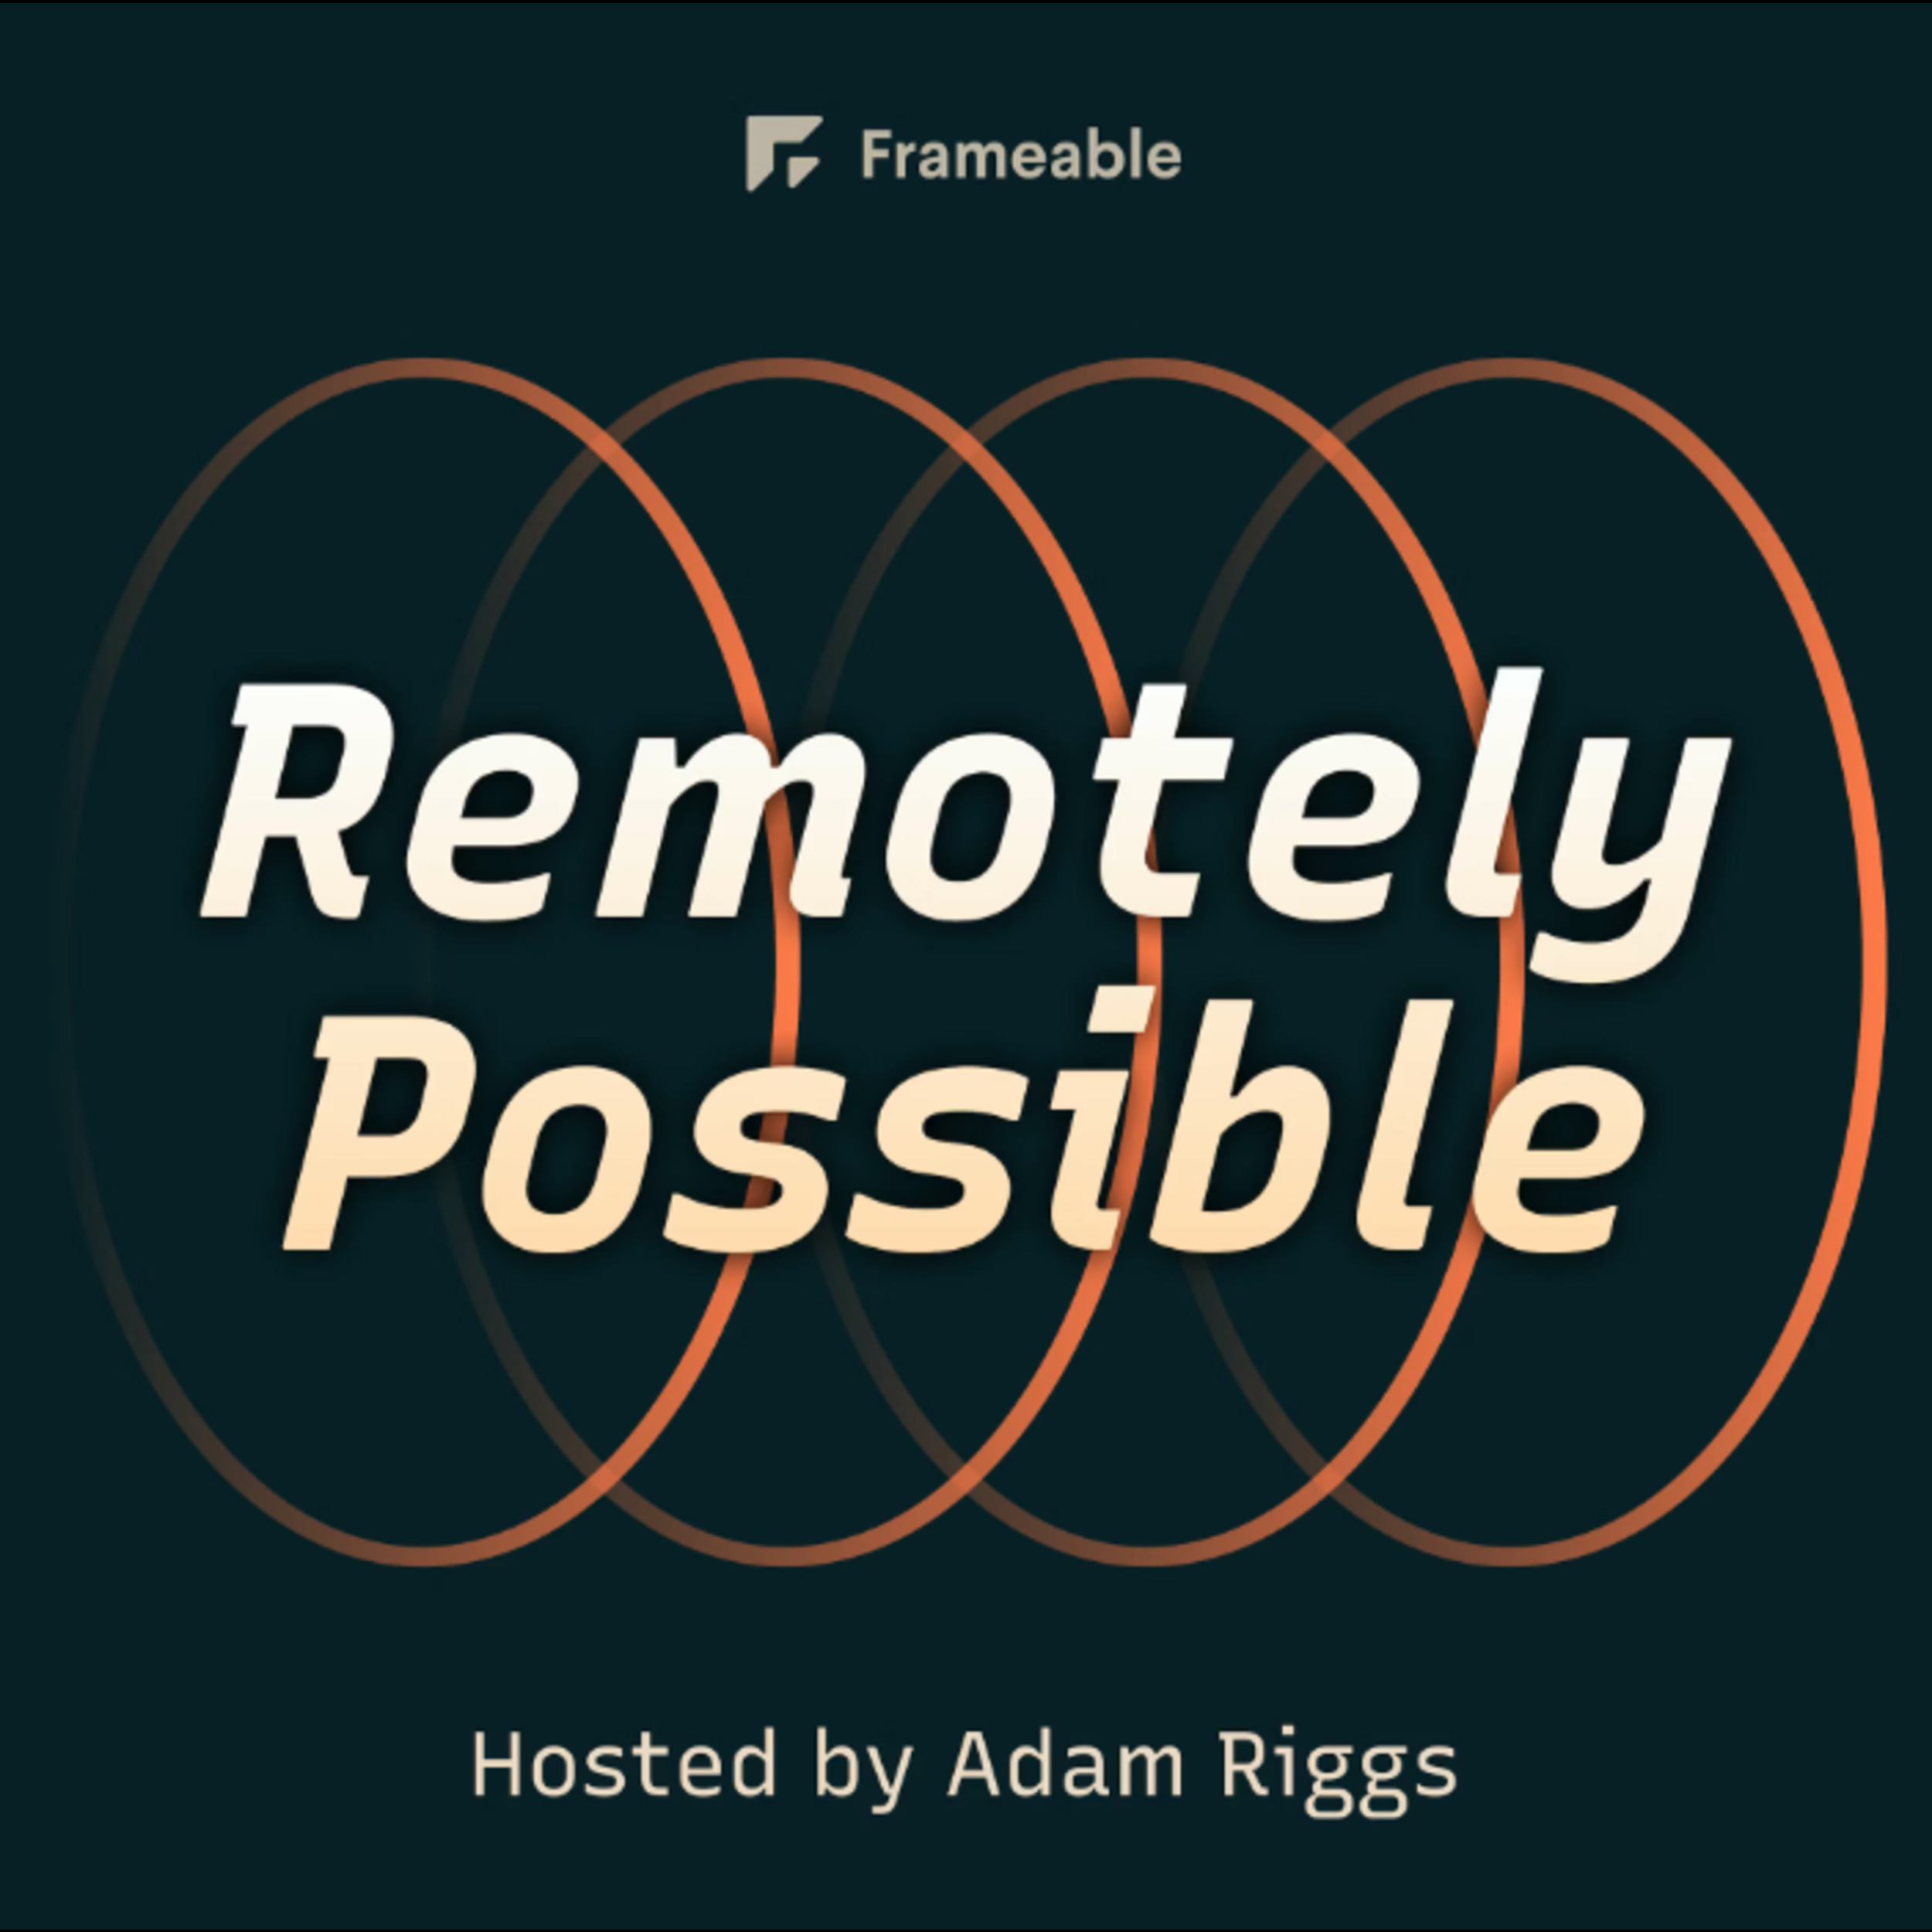 Artwork for podcast Remotely Possible